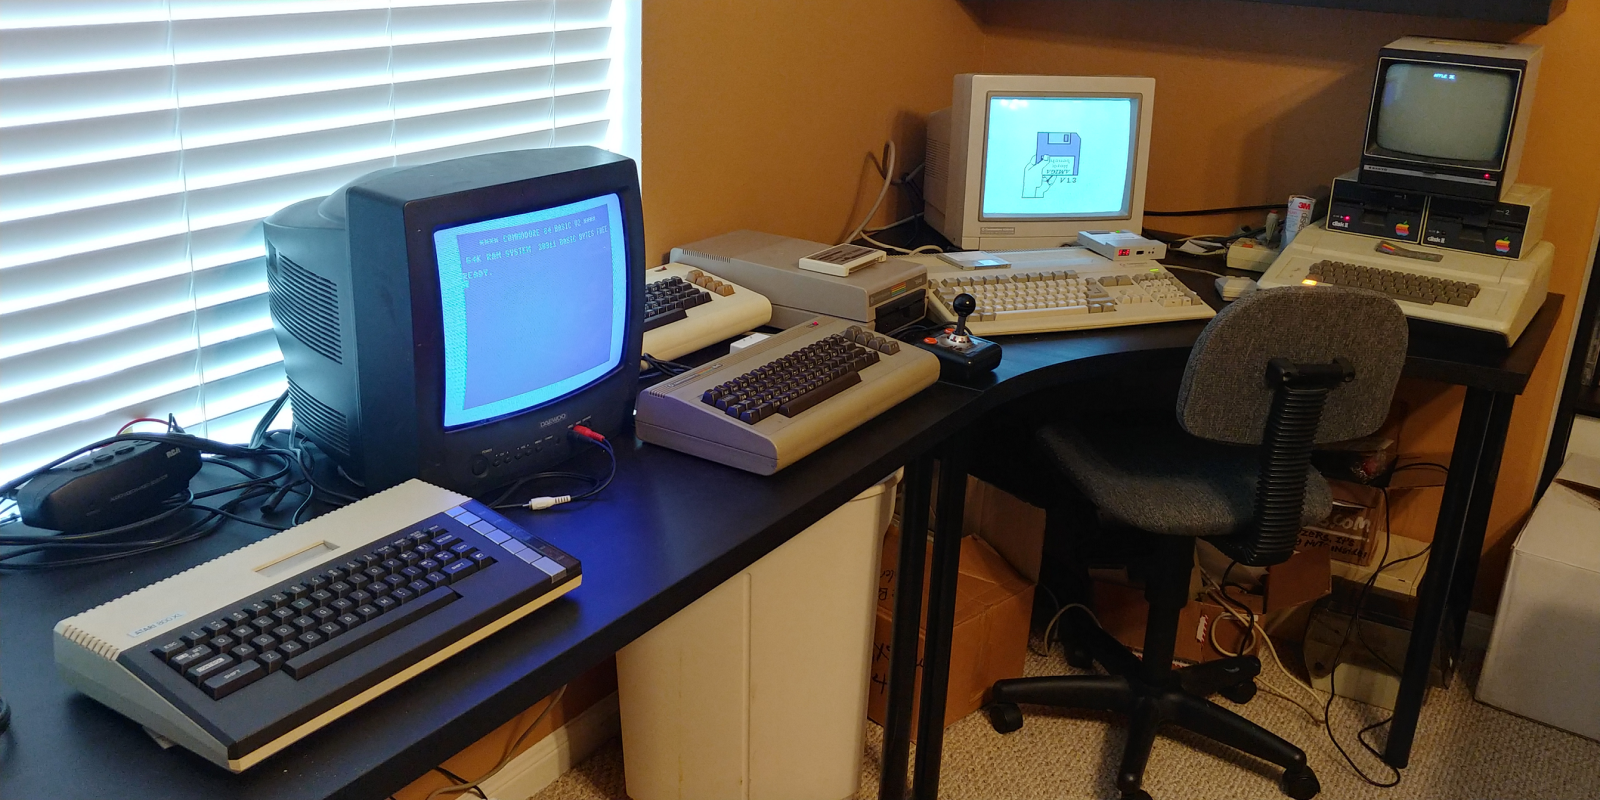 Vintage Atari, Commodore, and Apple computers. Picture by author